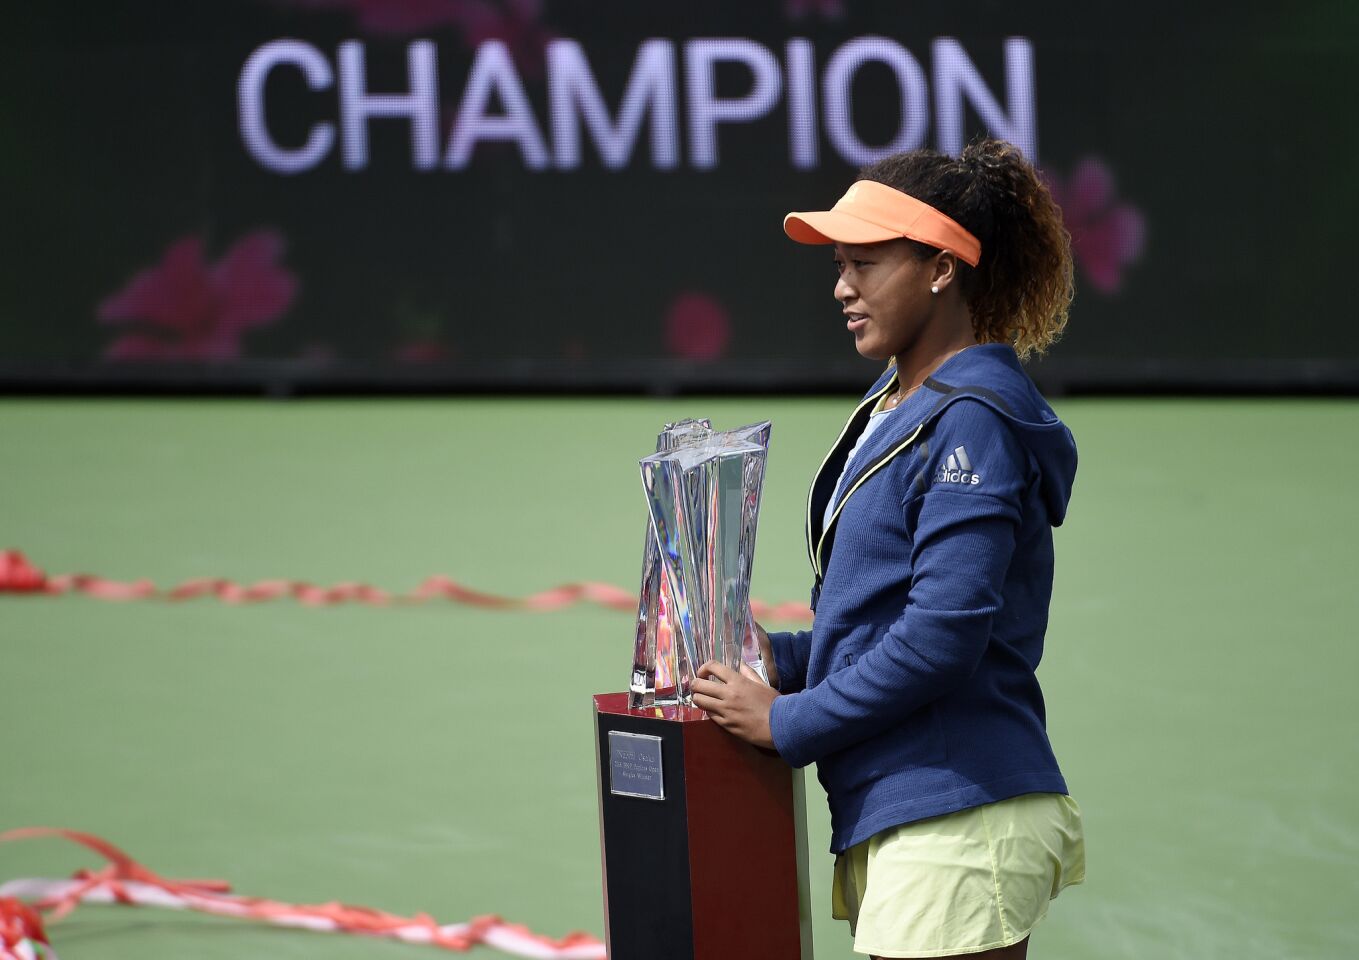 INDIAN WELLS, CA - MARCH 18: Naomi Osaka of Japan poses with the championship trophy after defeating Daria Kasatkina of Russia during the women's final on Day 14 of BNP Paribas Open on March 18, 2018 in Indian Wells, California. (Photo by Kevork Djansezian/Getty Images) ** OUTS - ELSENT, FPG, CM - OUTS * NM, PH, VA if sourced by CT, LA or MoD **